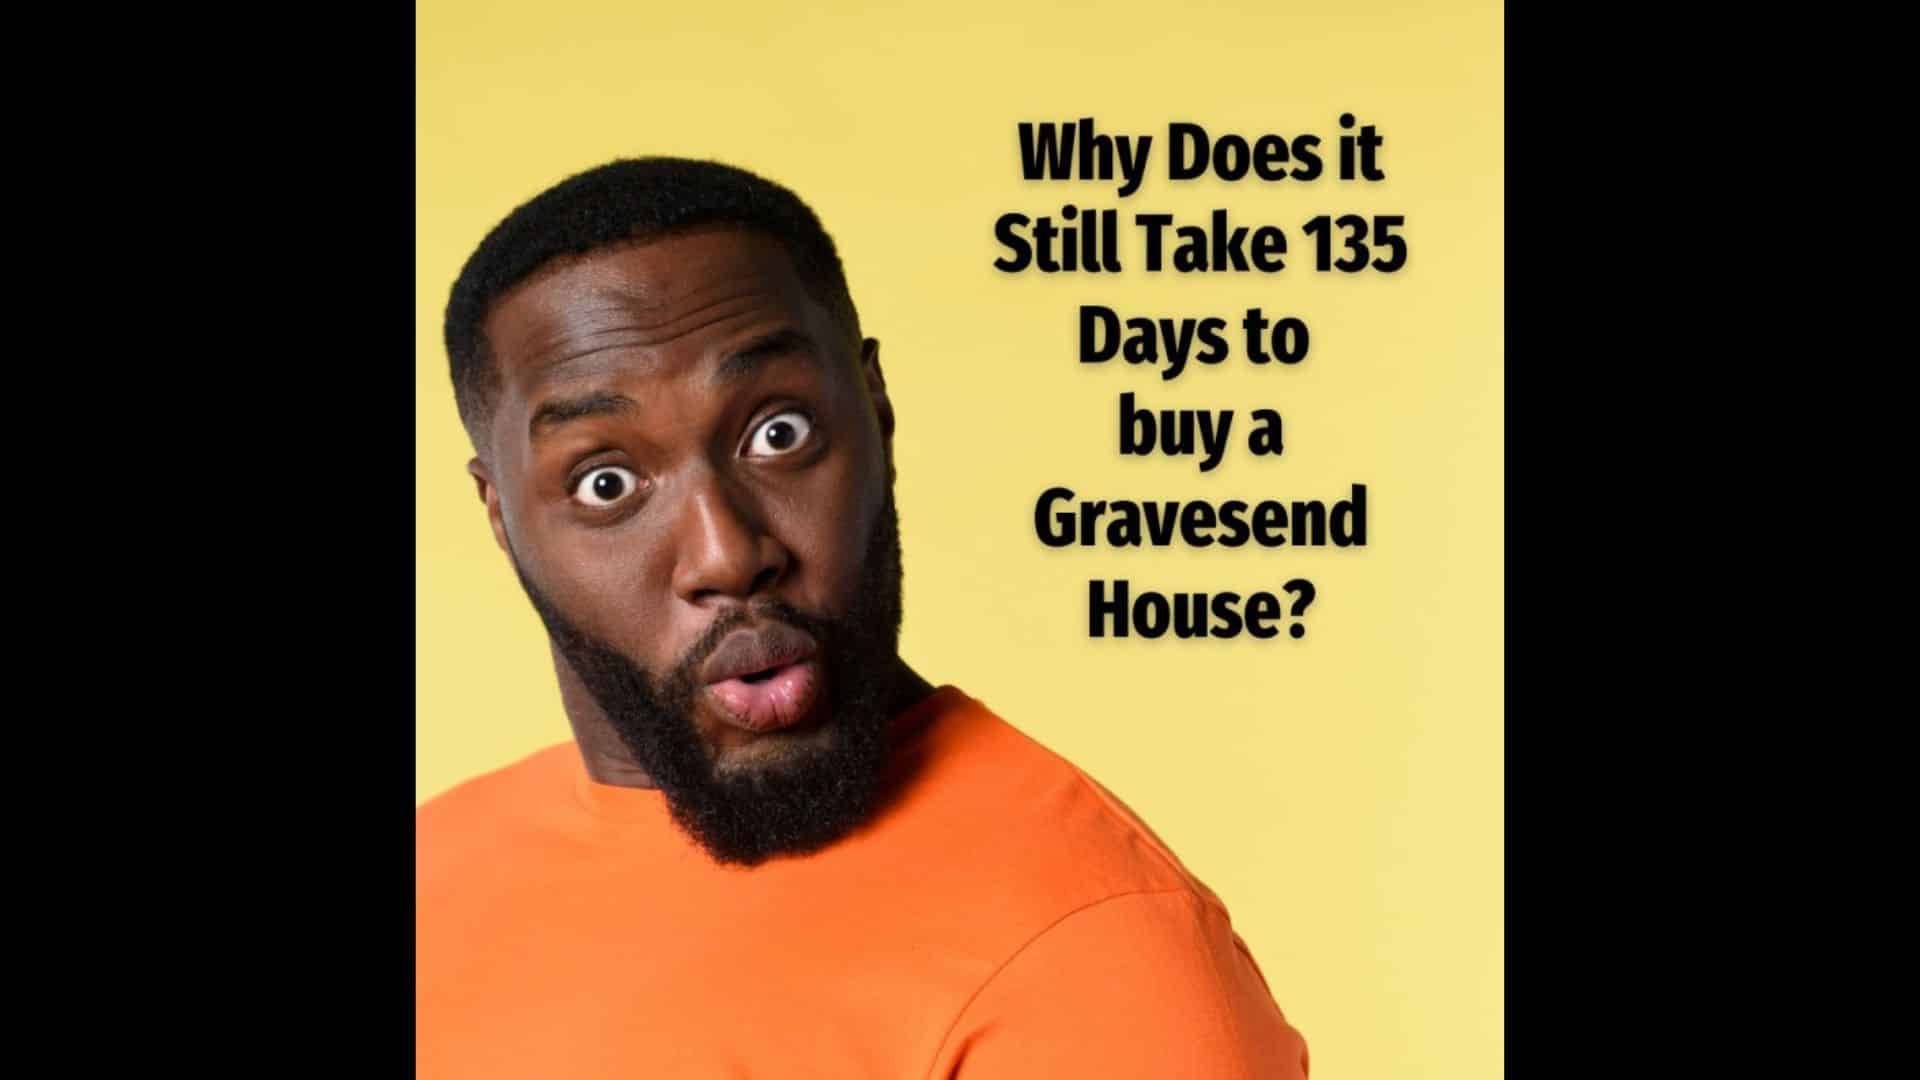 Why Does It Still Take 135 Days To Buy A Gravesend House?